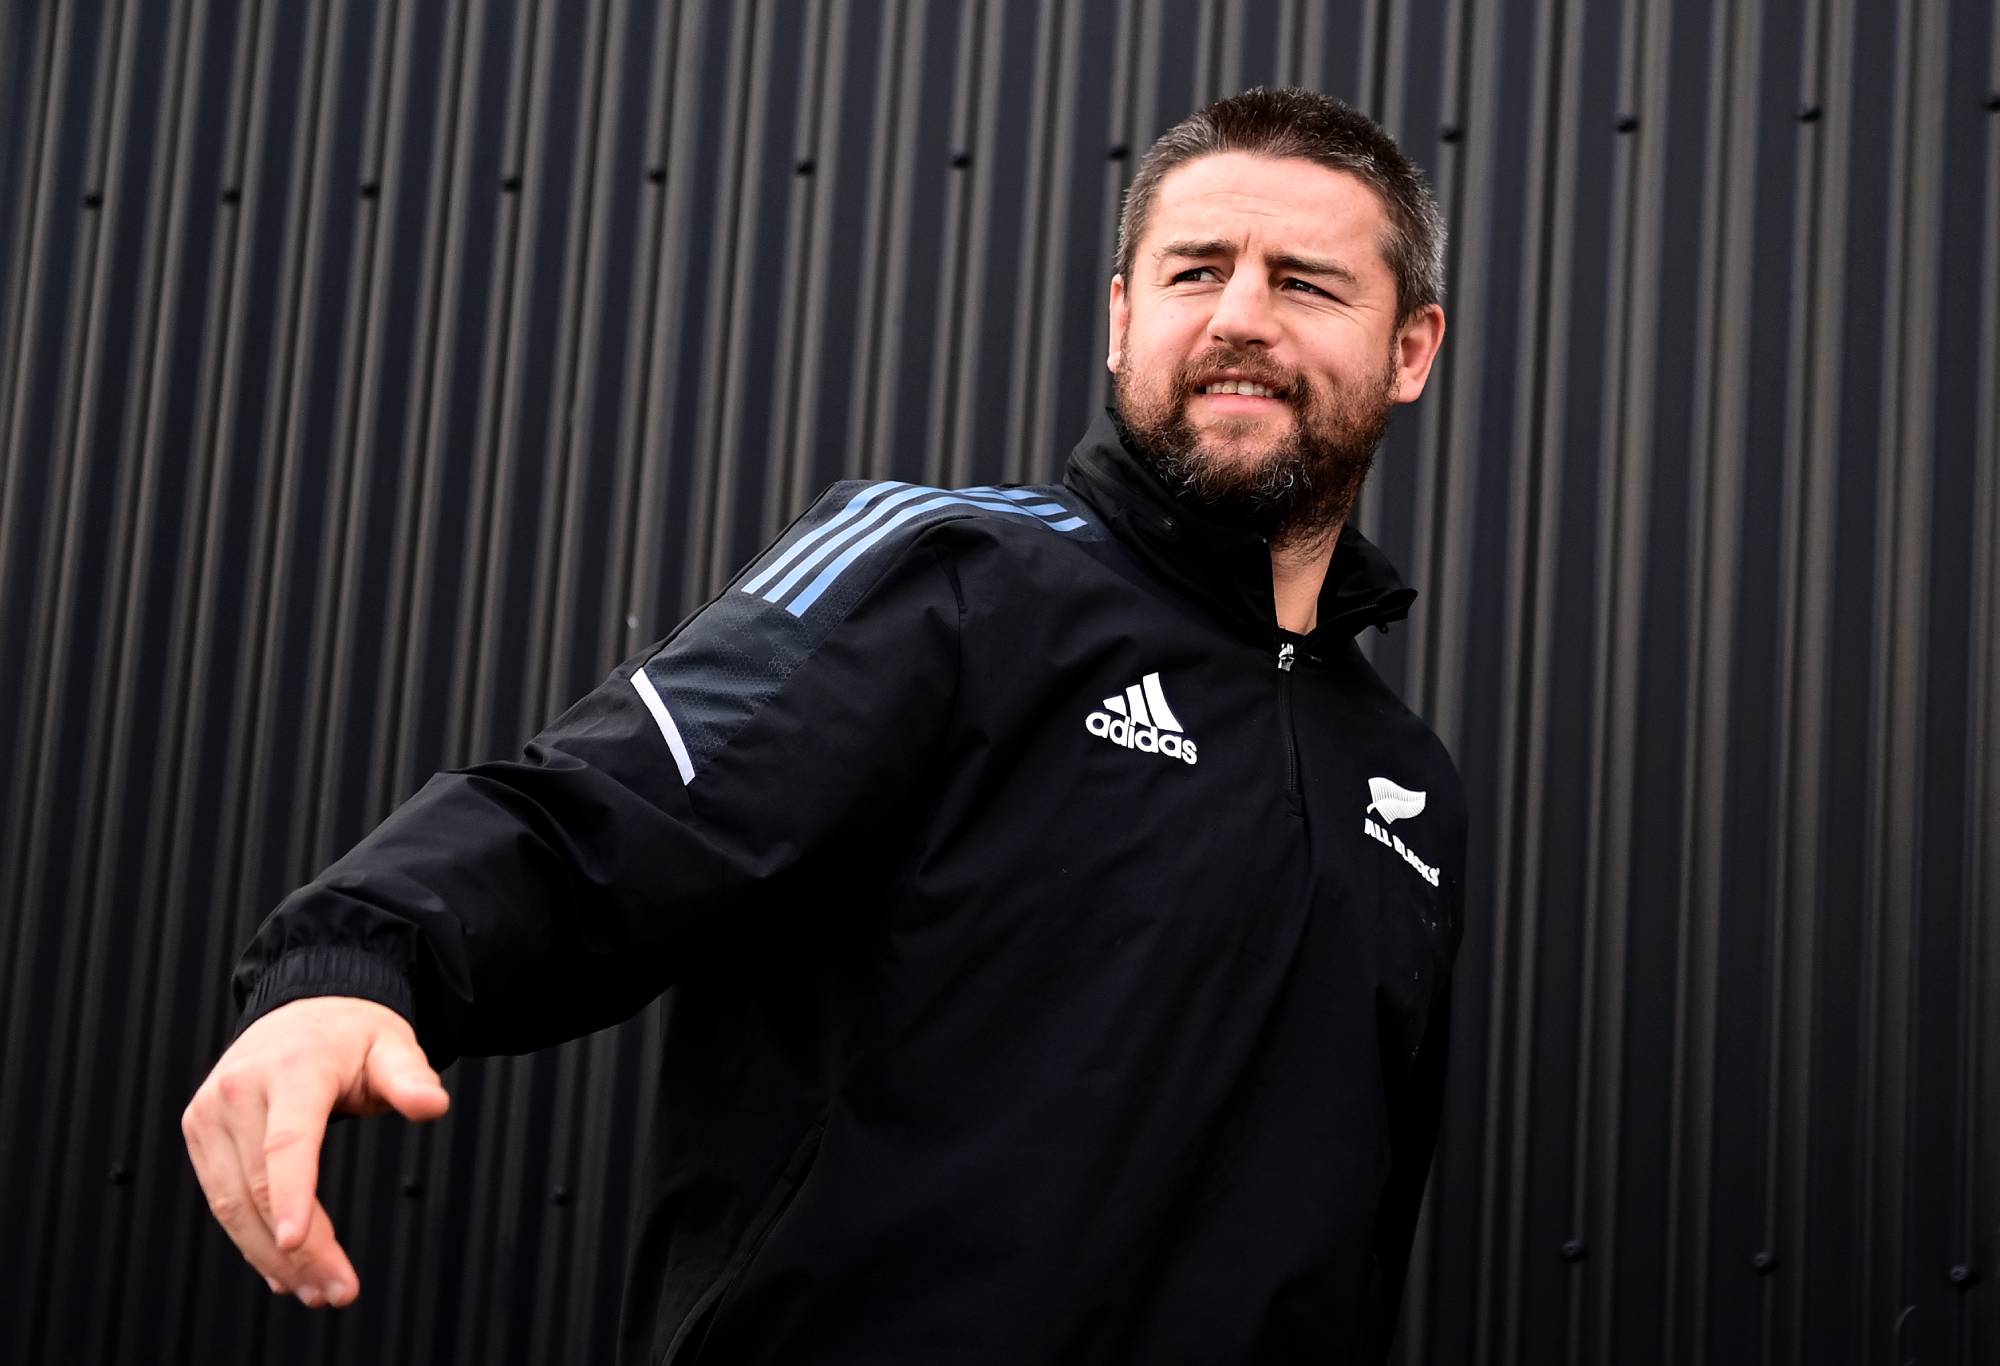 Dane Coles of the All Blacks arrives for the New Zealand All Blacks Captain's Run at Orangetheory Stadium on August 26, 2022 in Christchurch, New Zealand. (Photo by Hannah Peters/Getty Images)